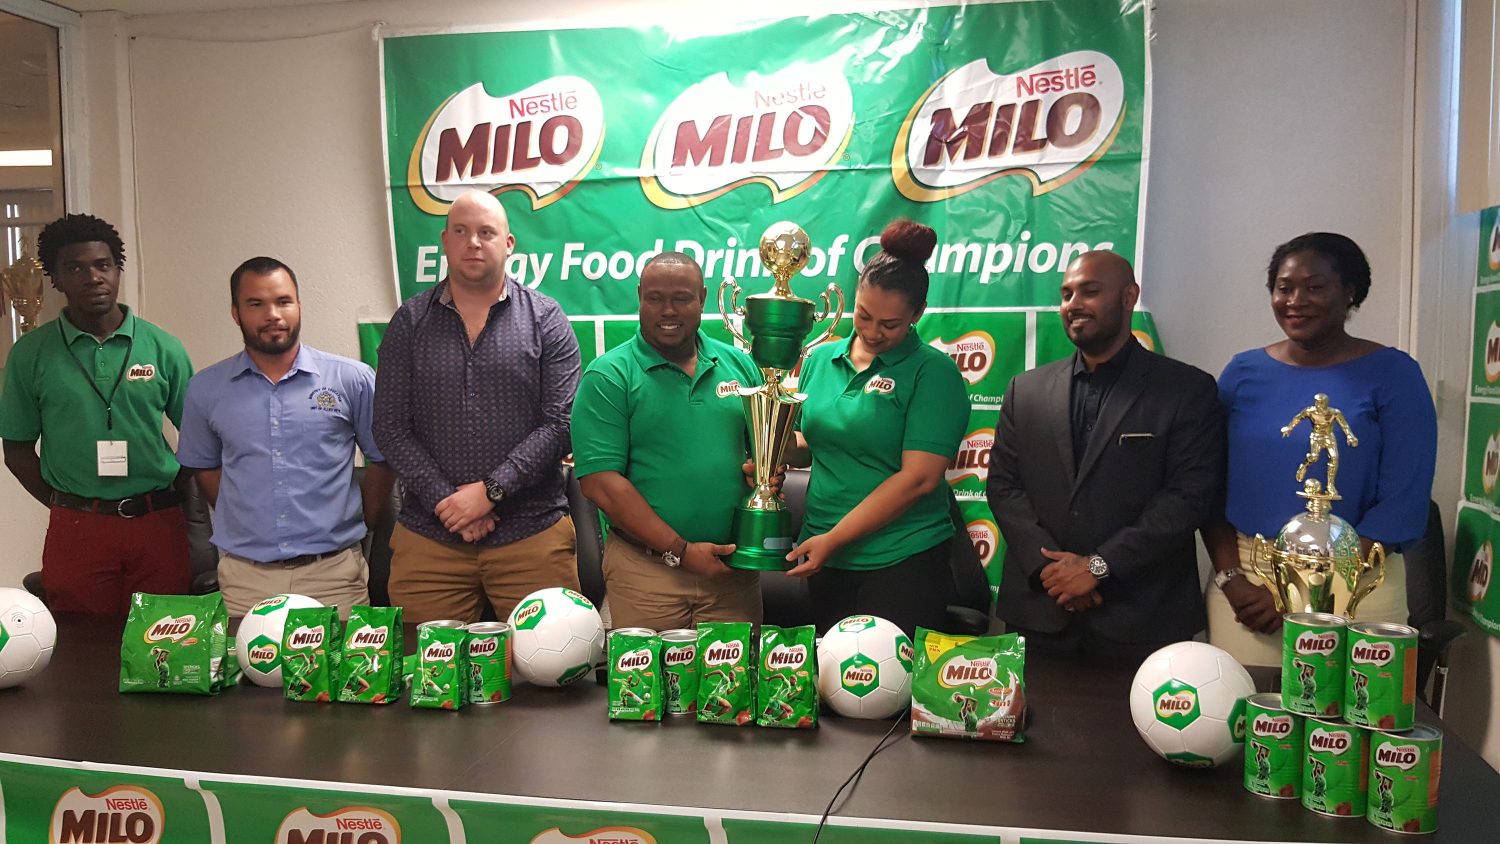 Co-Director of the Petra Organization Troy Mendonca (centre) collecting the championship trophy from Brand Manager Christel Van Sluytman following the official launch of the 6th Milo U18 Secondary Schools Football Tournament. Among the members of the launch party are Petra Representative Mark Alleyne (left), Ministry of Education Allied Arts Department representative Nicholas Fraser (2nd from left), GFF Technical Director Ian Greenwood (3rd from left) and Director and Executive Officer of M. Beepats and Sons Jonathan Beepat (2nd from right)